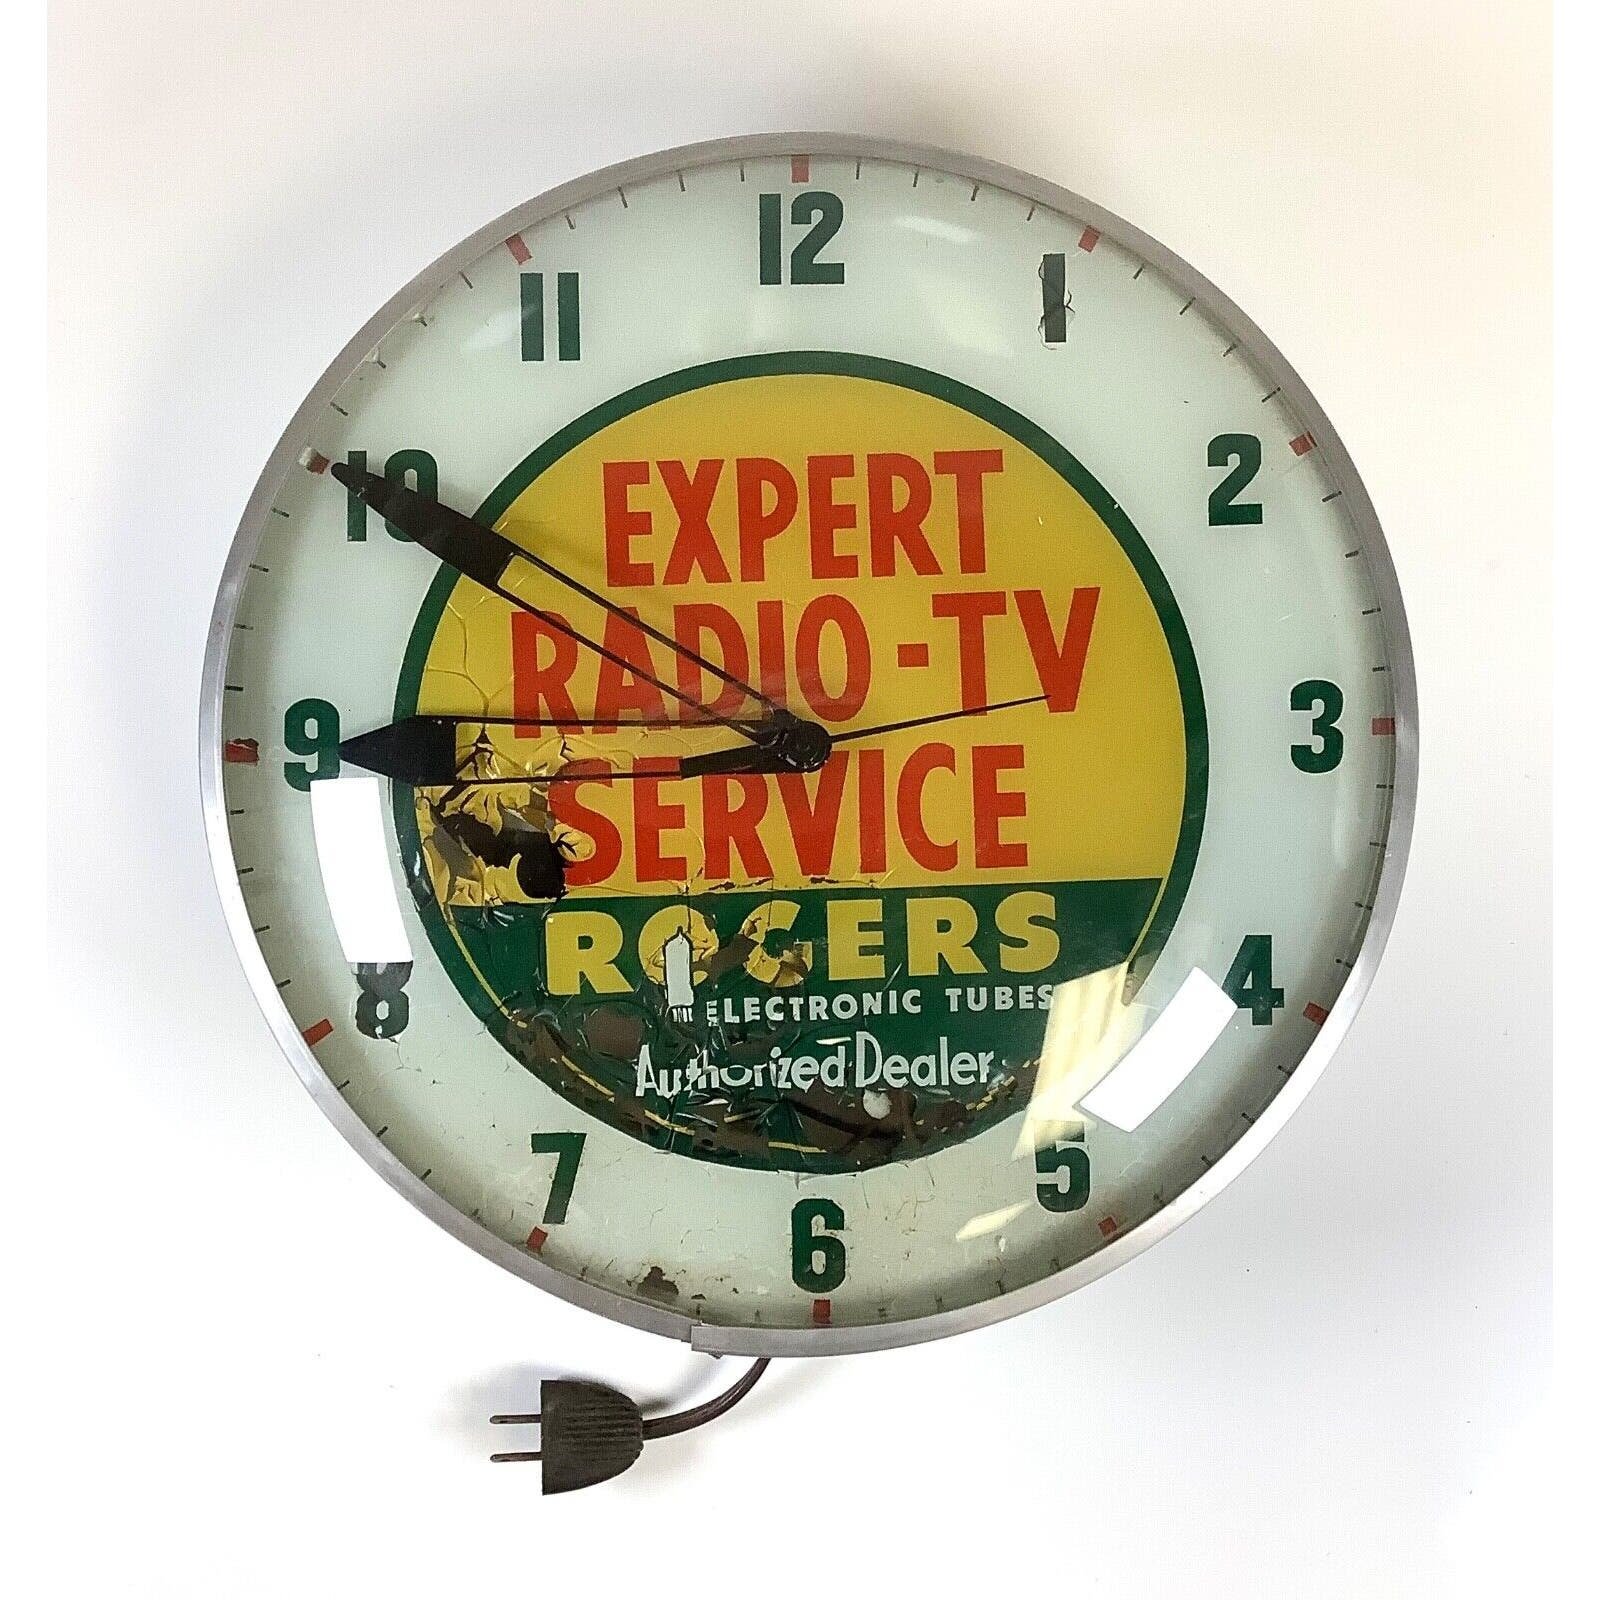 Vtg Expert Radio TV Service Rogers Tubes Bubble Glass Lighted Advertising Clock qUgRd8hHf